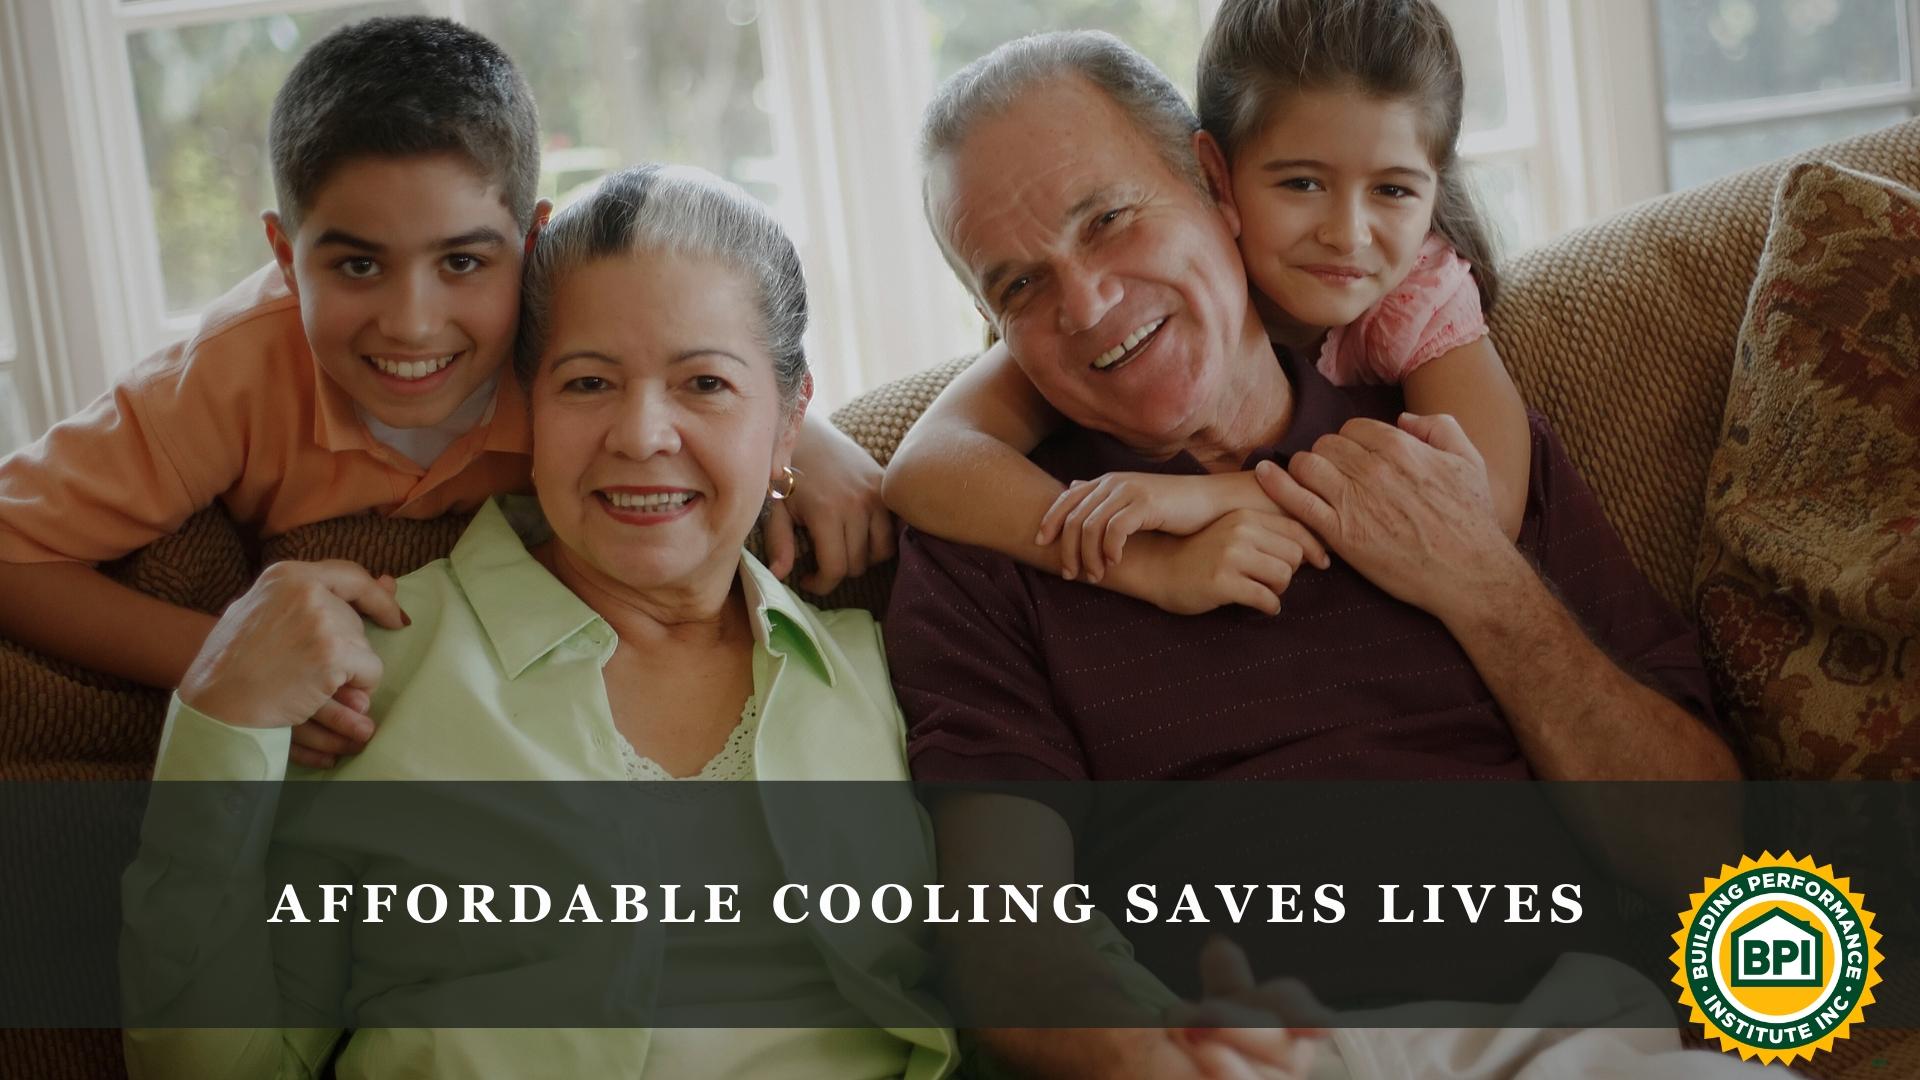 Latino grandparents and grandchildren sit on a couch hugging, enjoying a comfortable home.